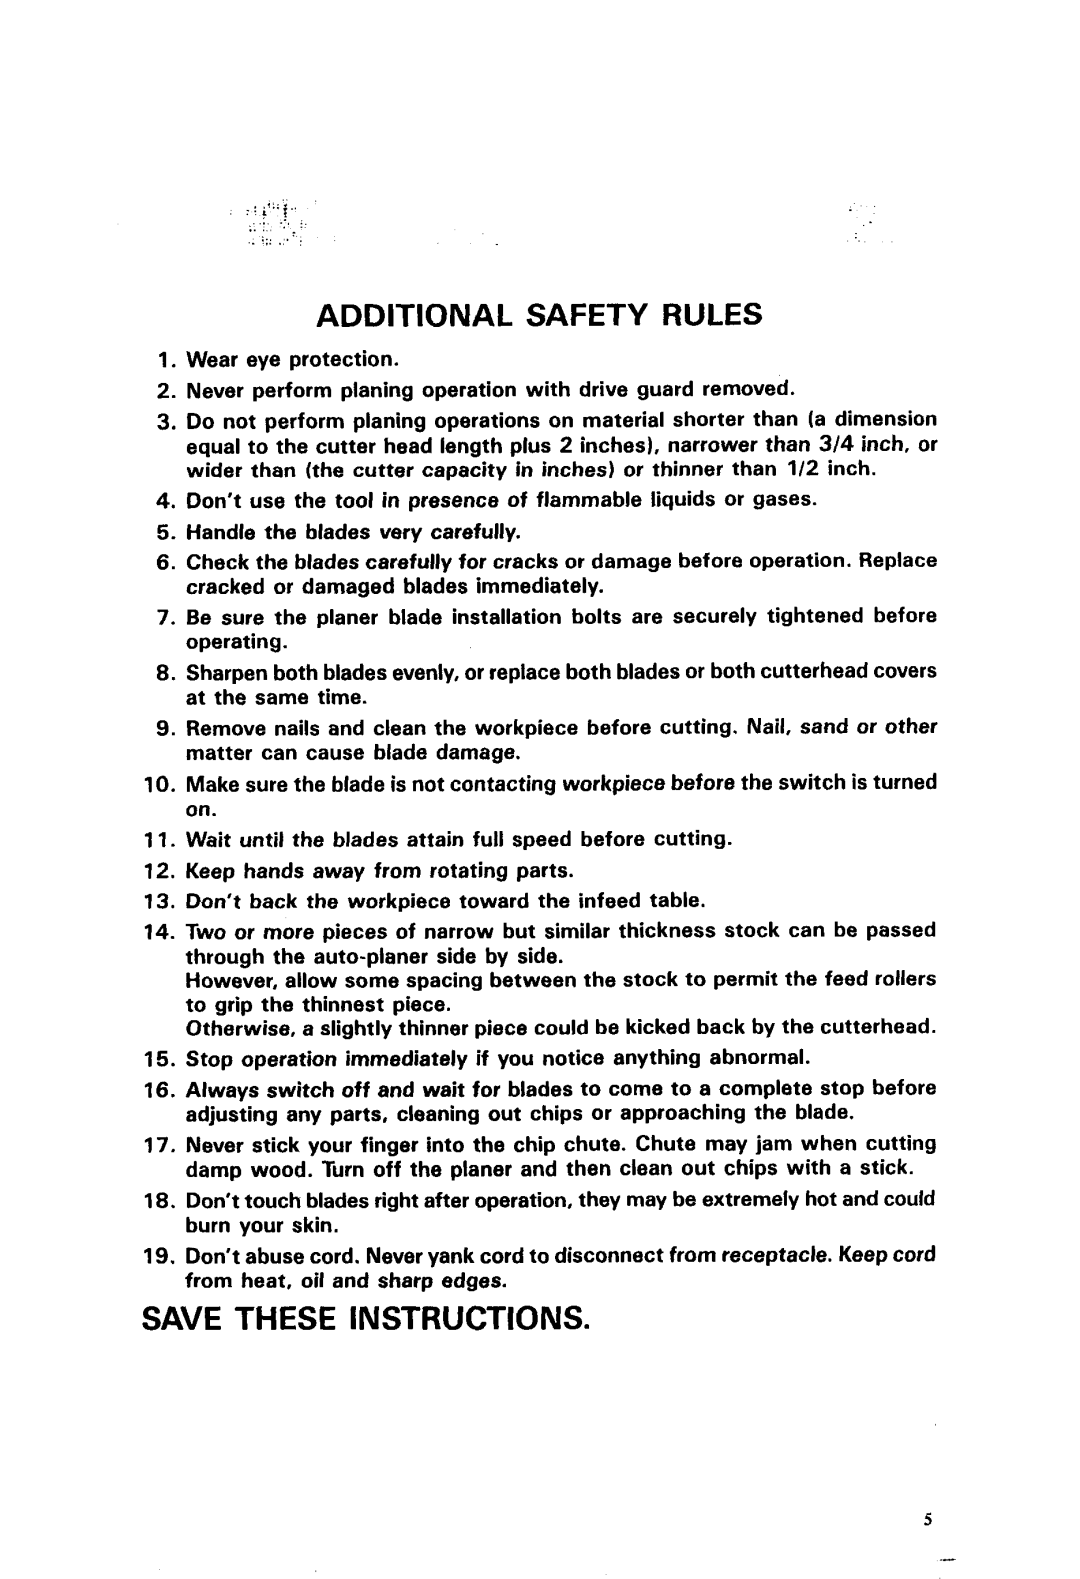 Makita 2040 instruction manual Save These Instructions, Additional Safety Rules 